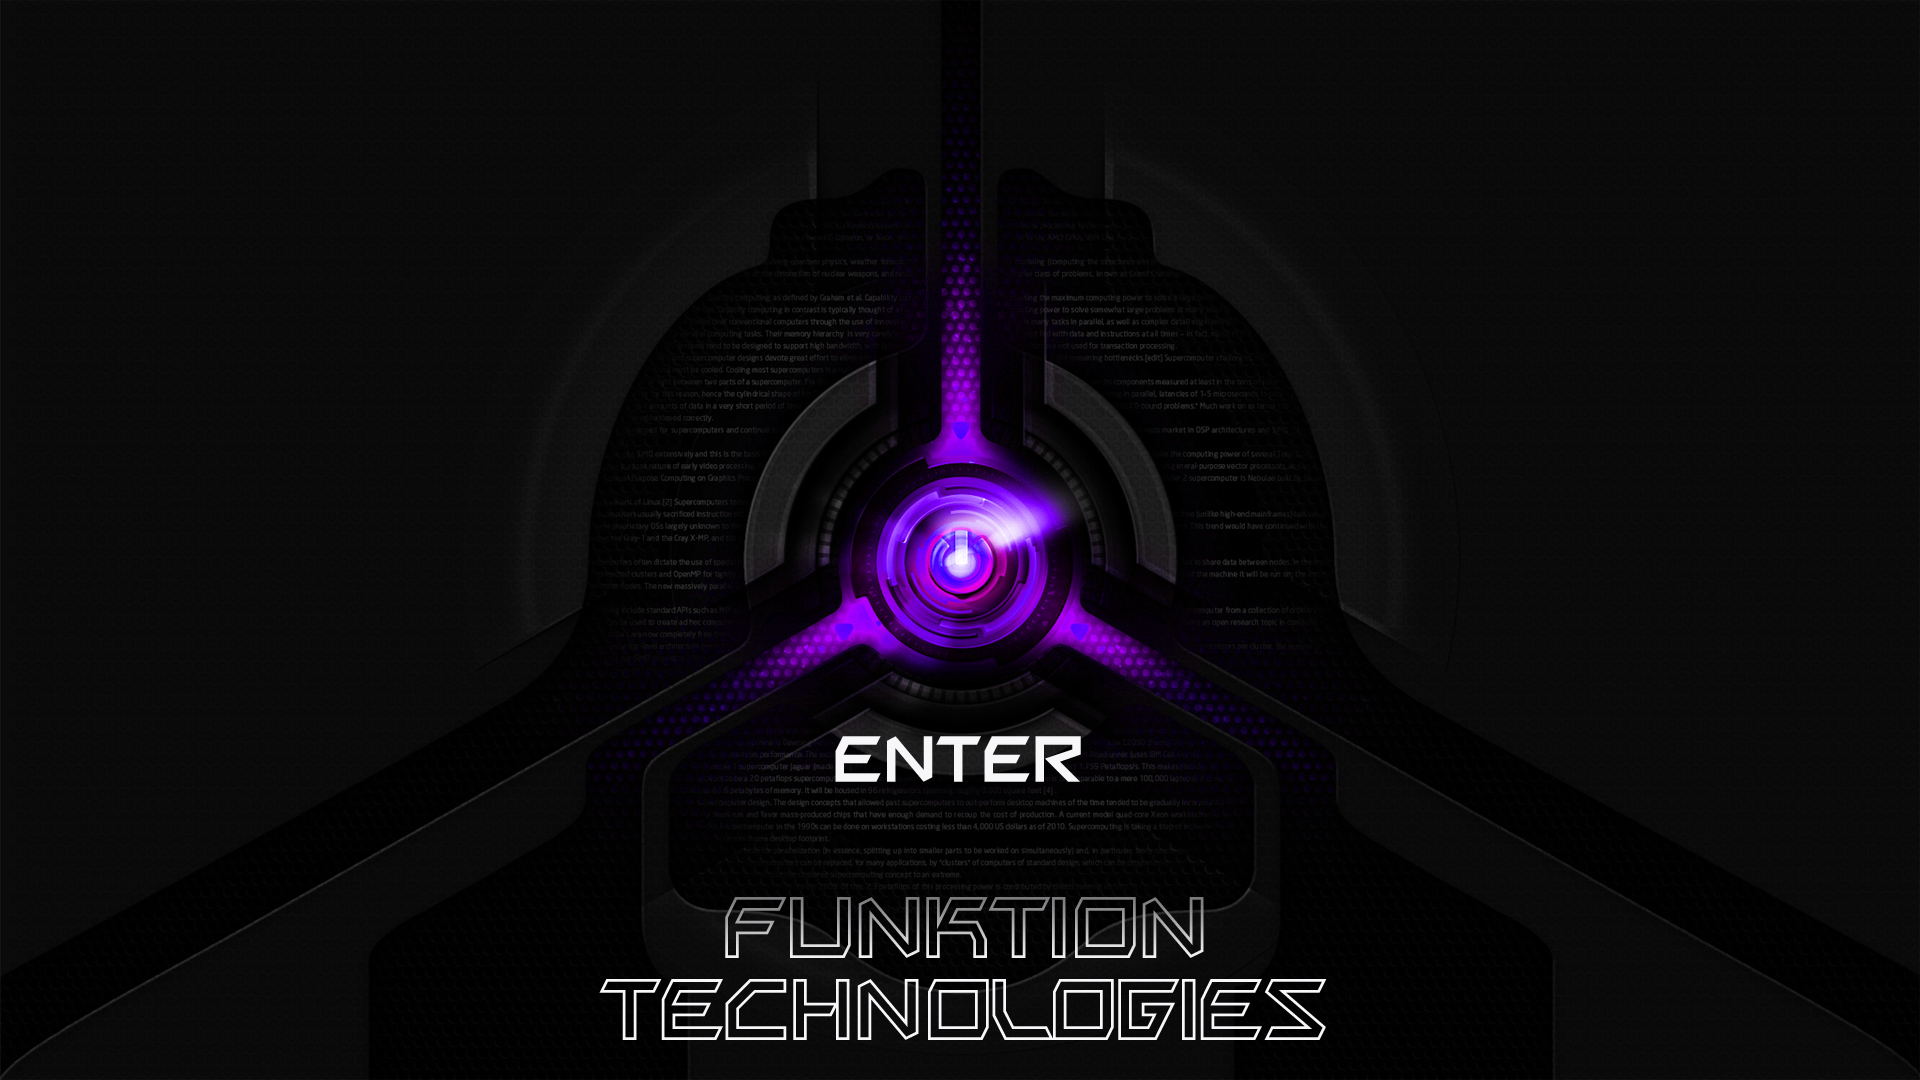 FUNKTION TECHNOLOGIES